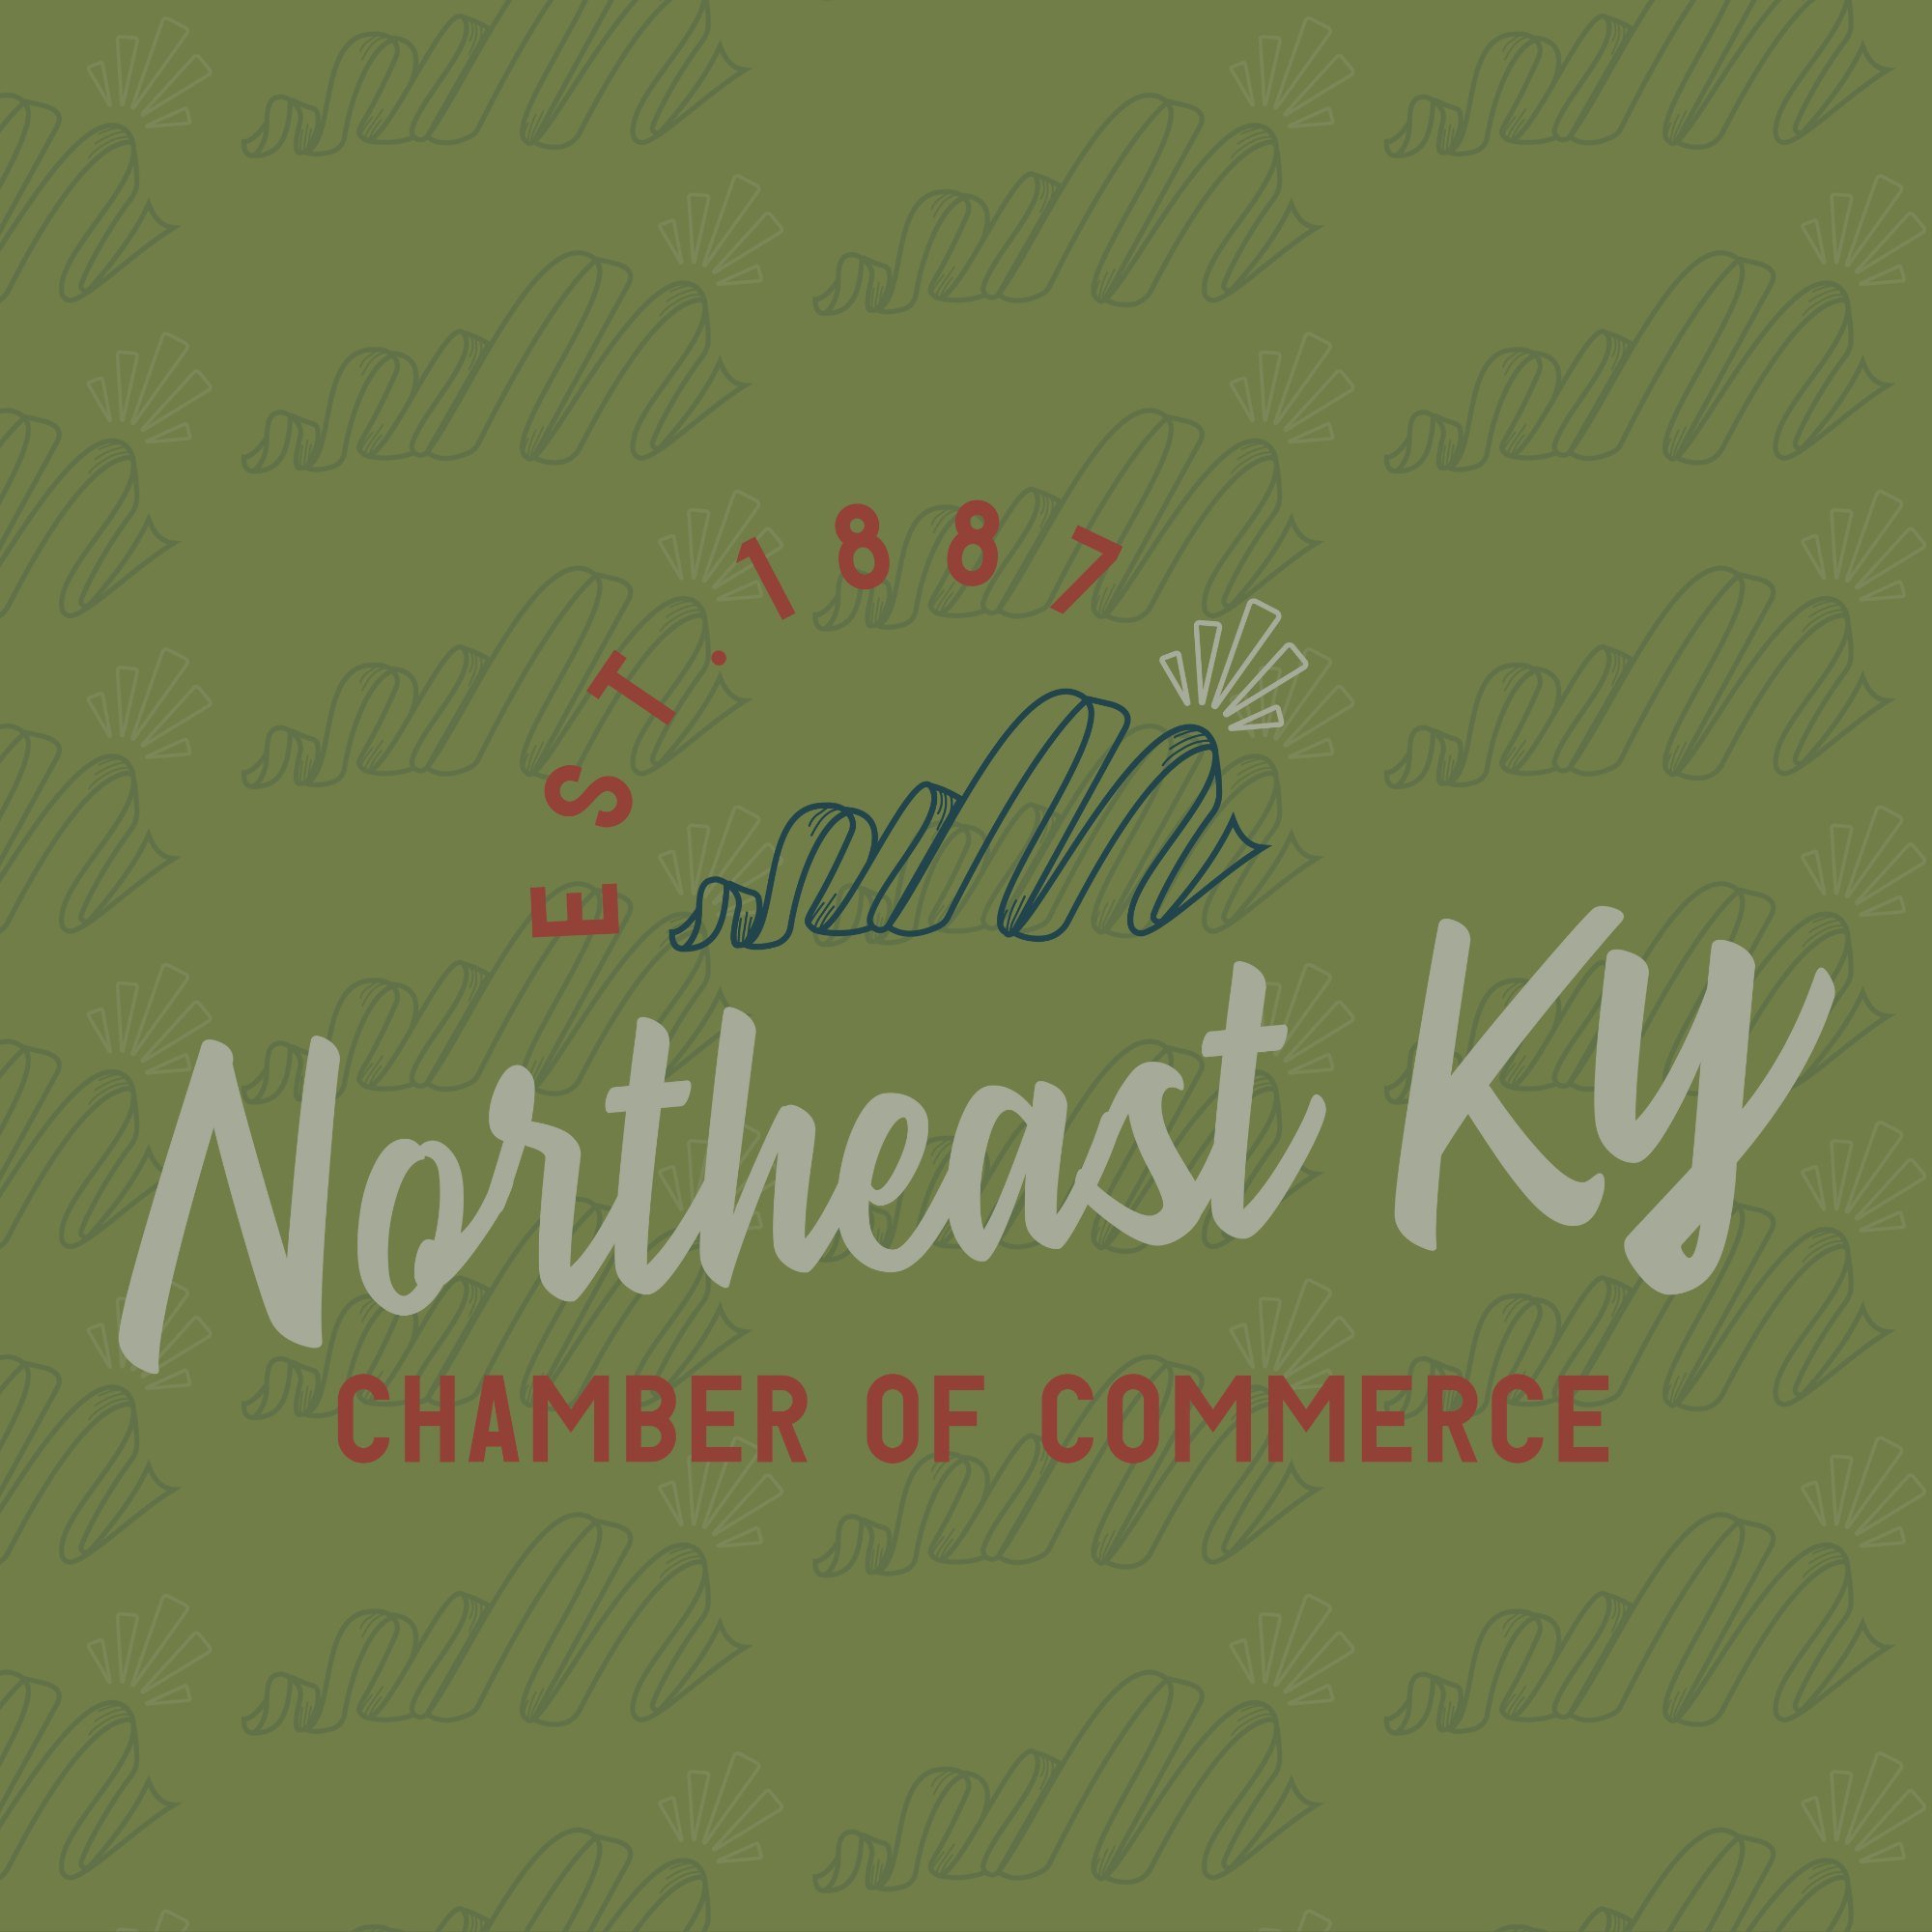 Forge. Connect. Grow ⚡ a New brand identity design for the Northeast KY Chamber of Commerce!

When going through our brand questionnaire and discussing with them the future of the Chamber, they wanted the new branding to show energy, trustworthiness 